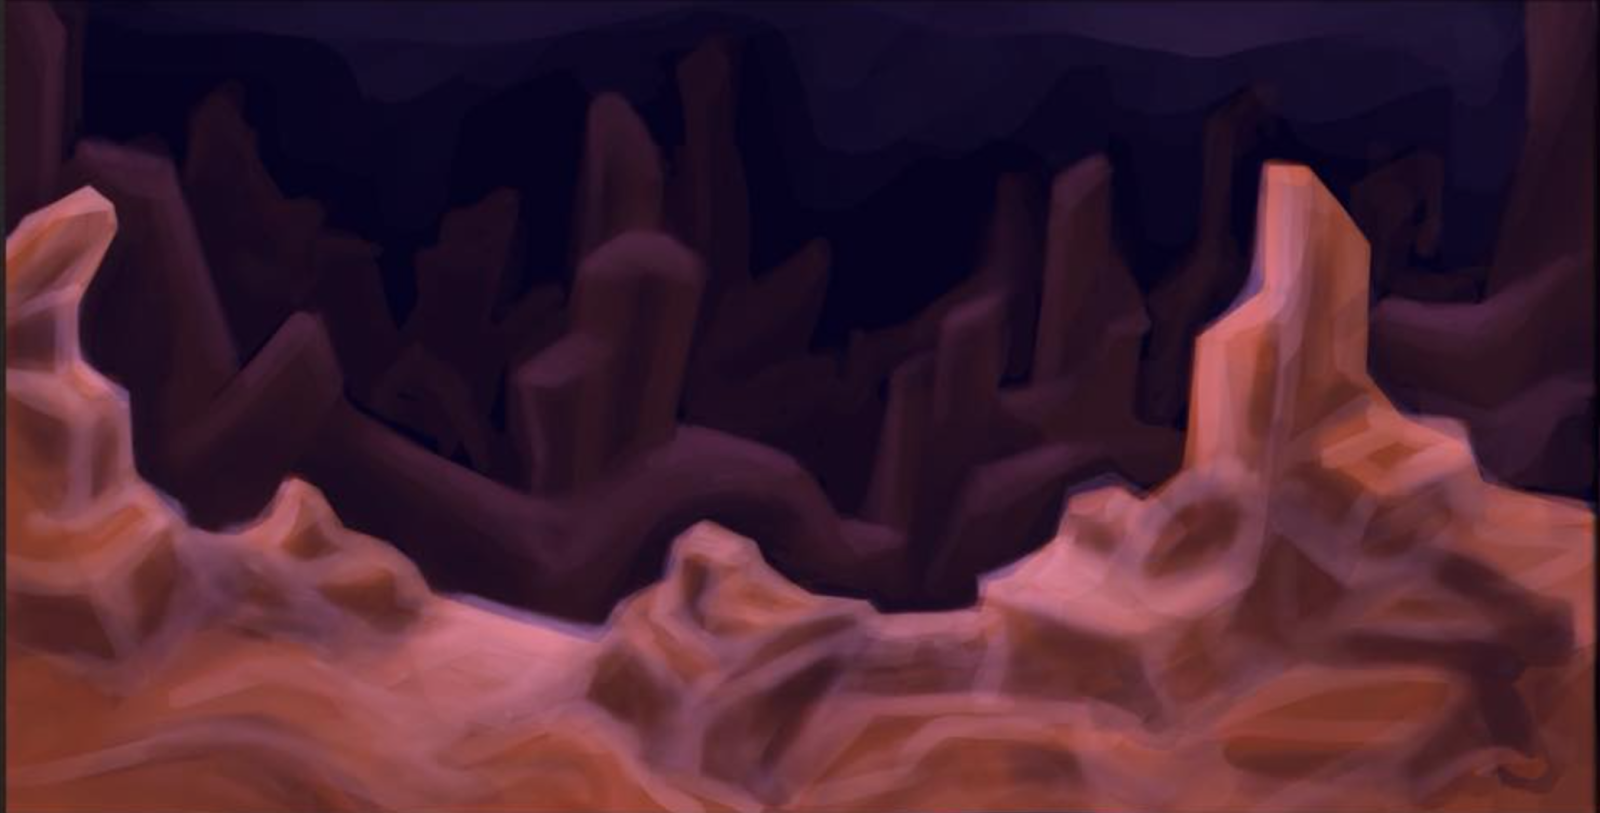 abstract rocky concept art